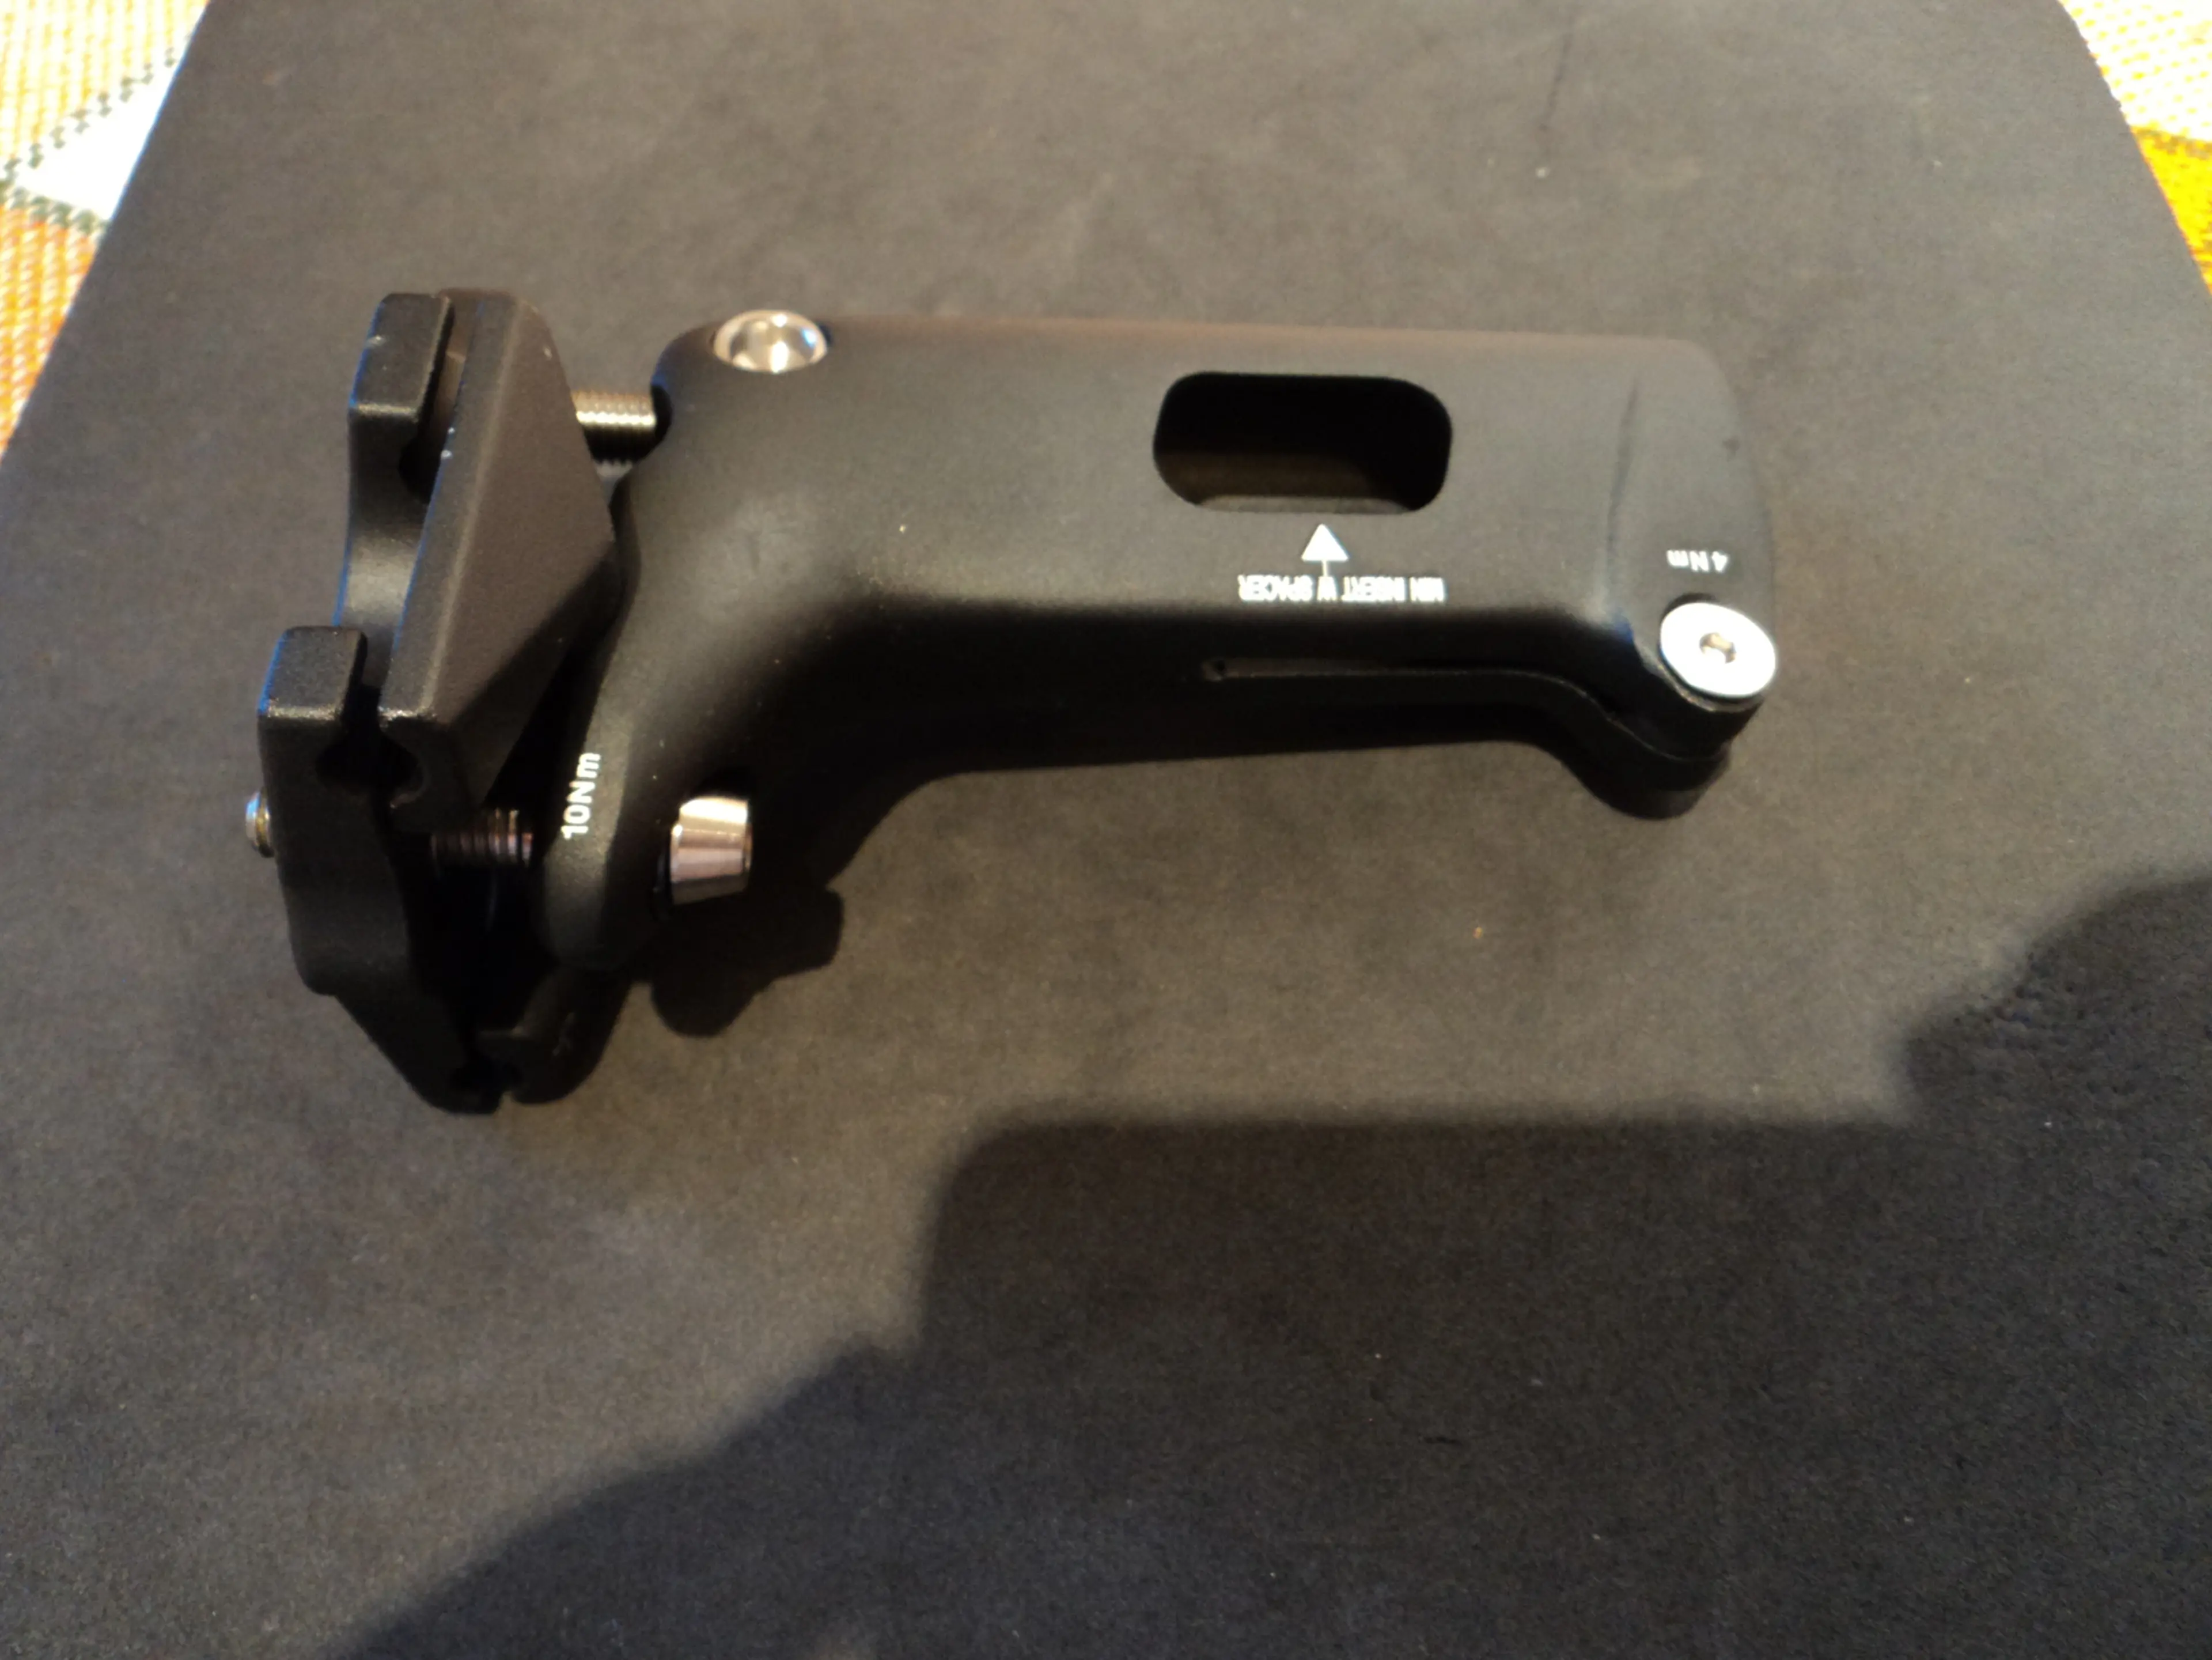 Image Giant tcr isp seat clamp - long